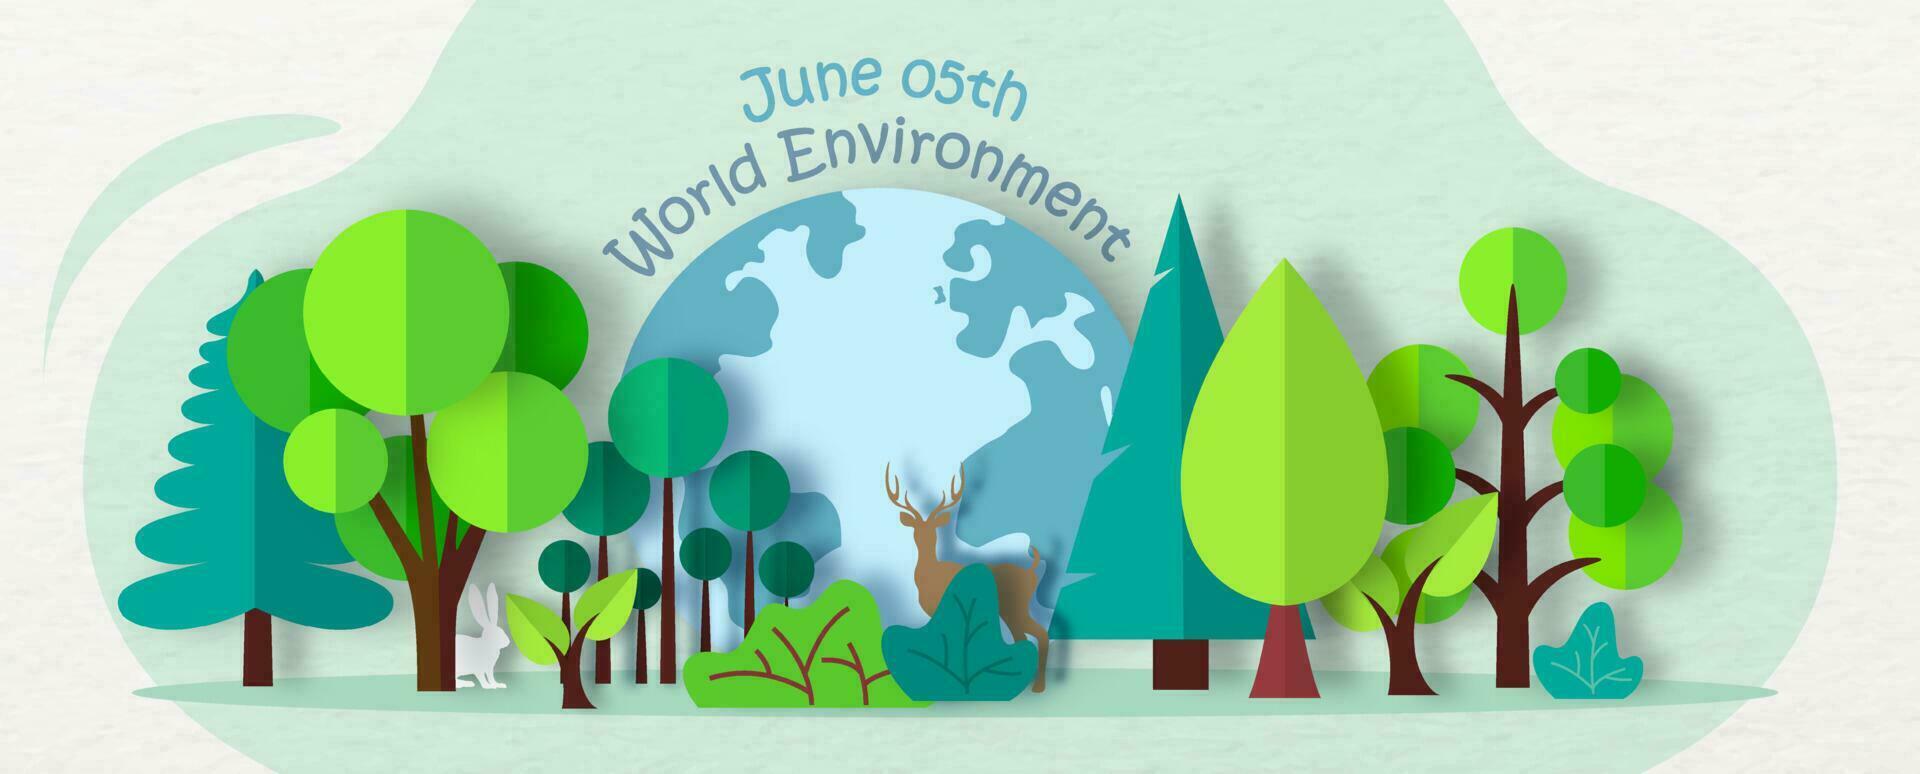 Origami and paper cut wild concept with giant global and wording of world environment day on light green background. Poster campaign of world environment day in paper cut style. vector